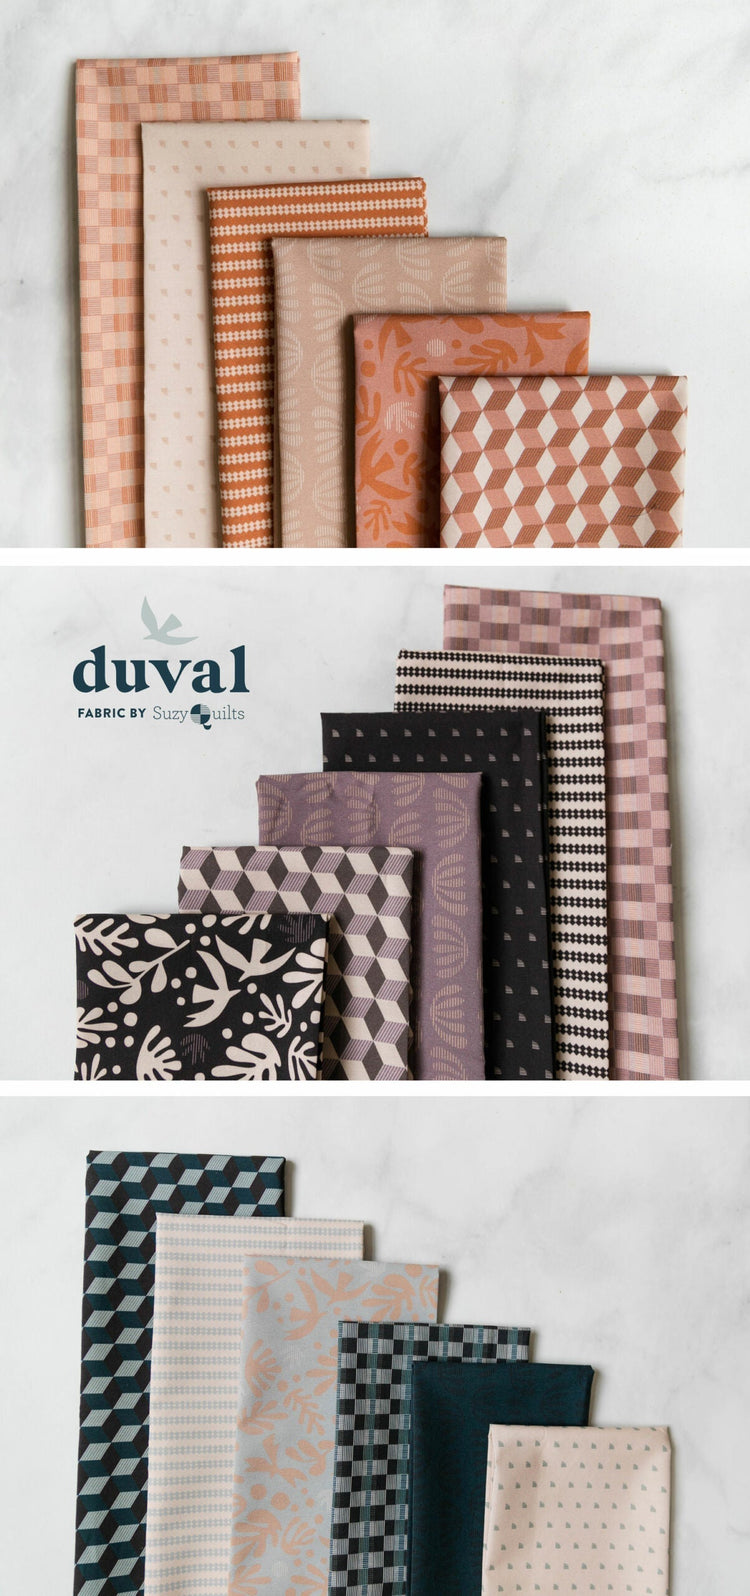 Art Gallery Fabrics - Duval By Suzy Quilts - Blocks Snapdragon